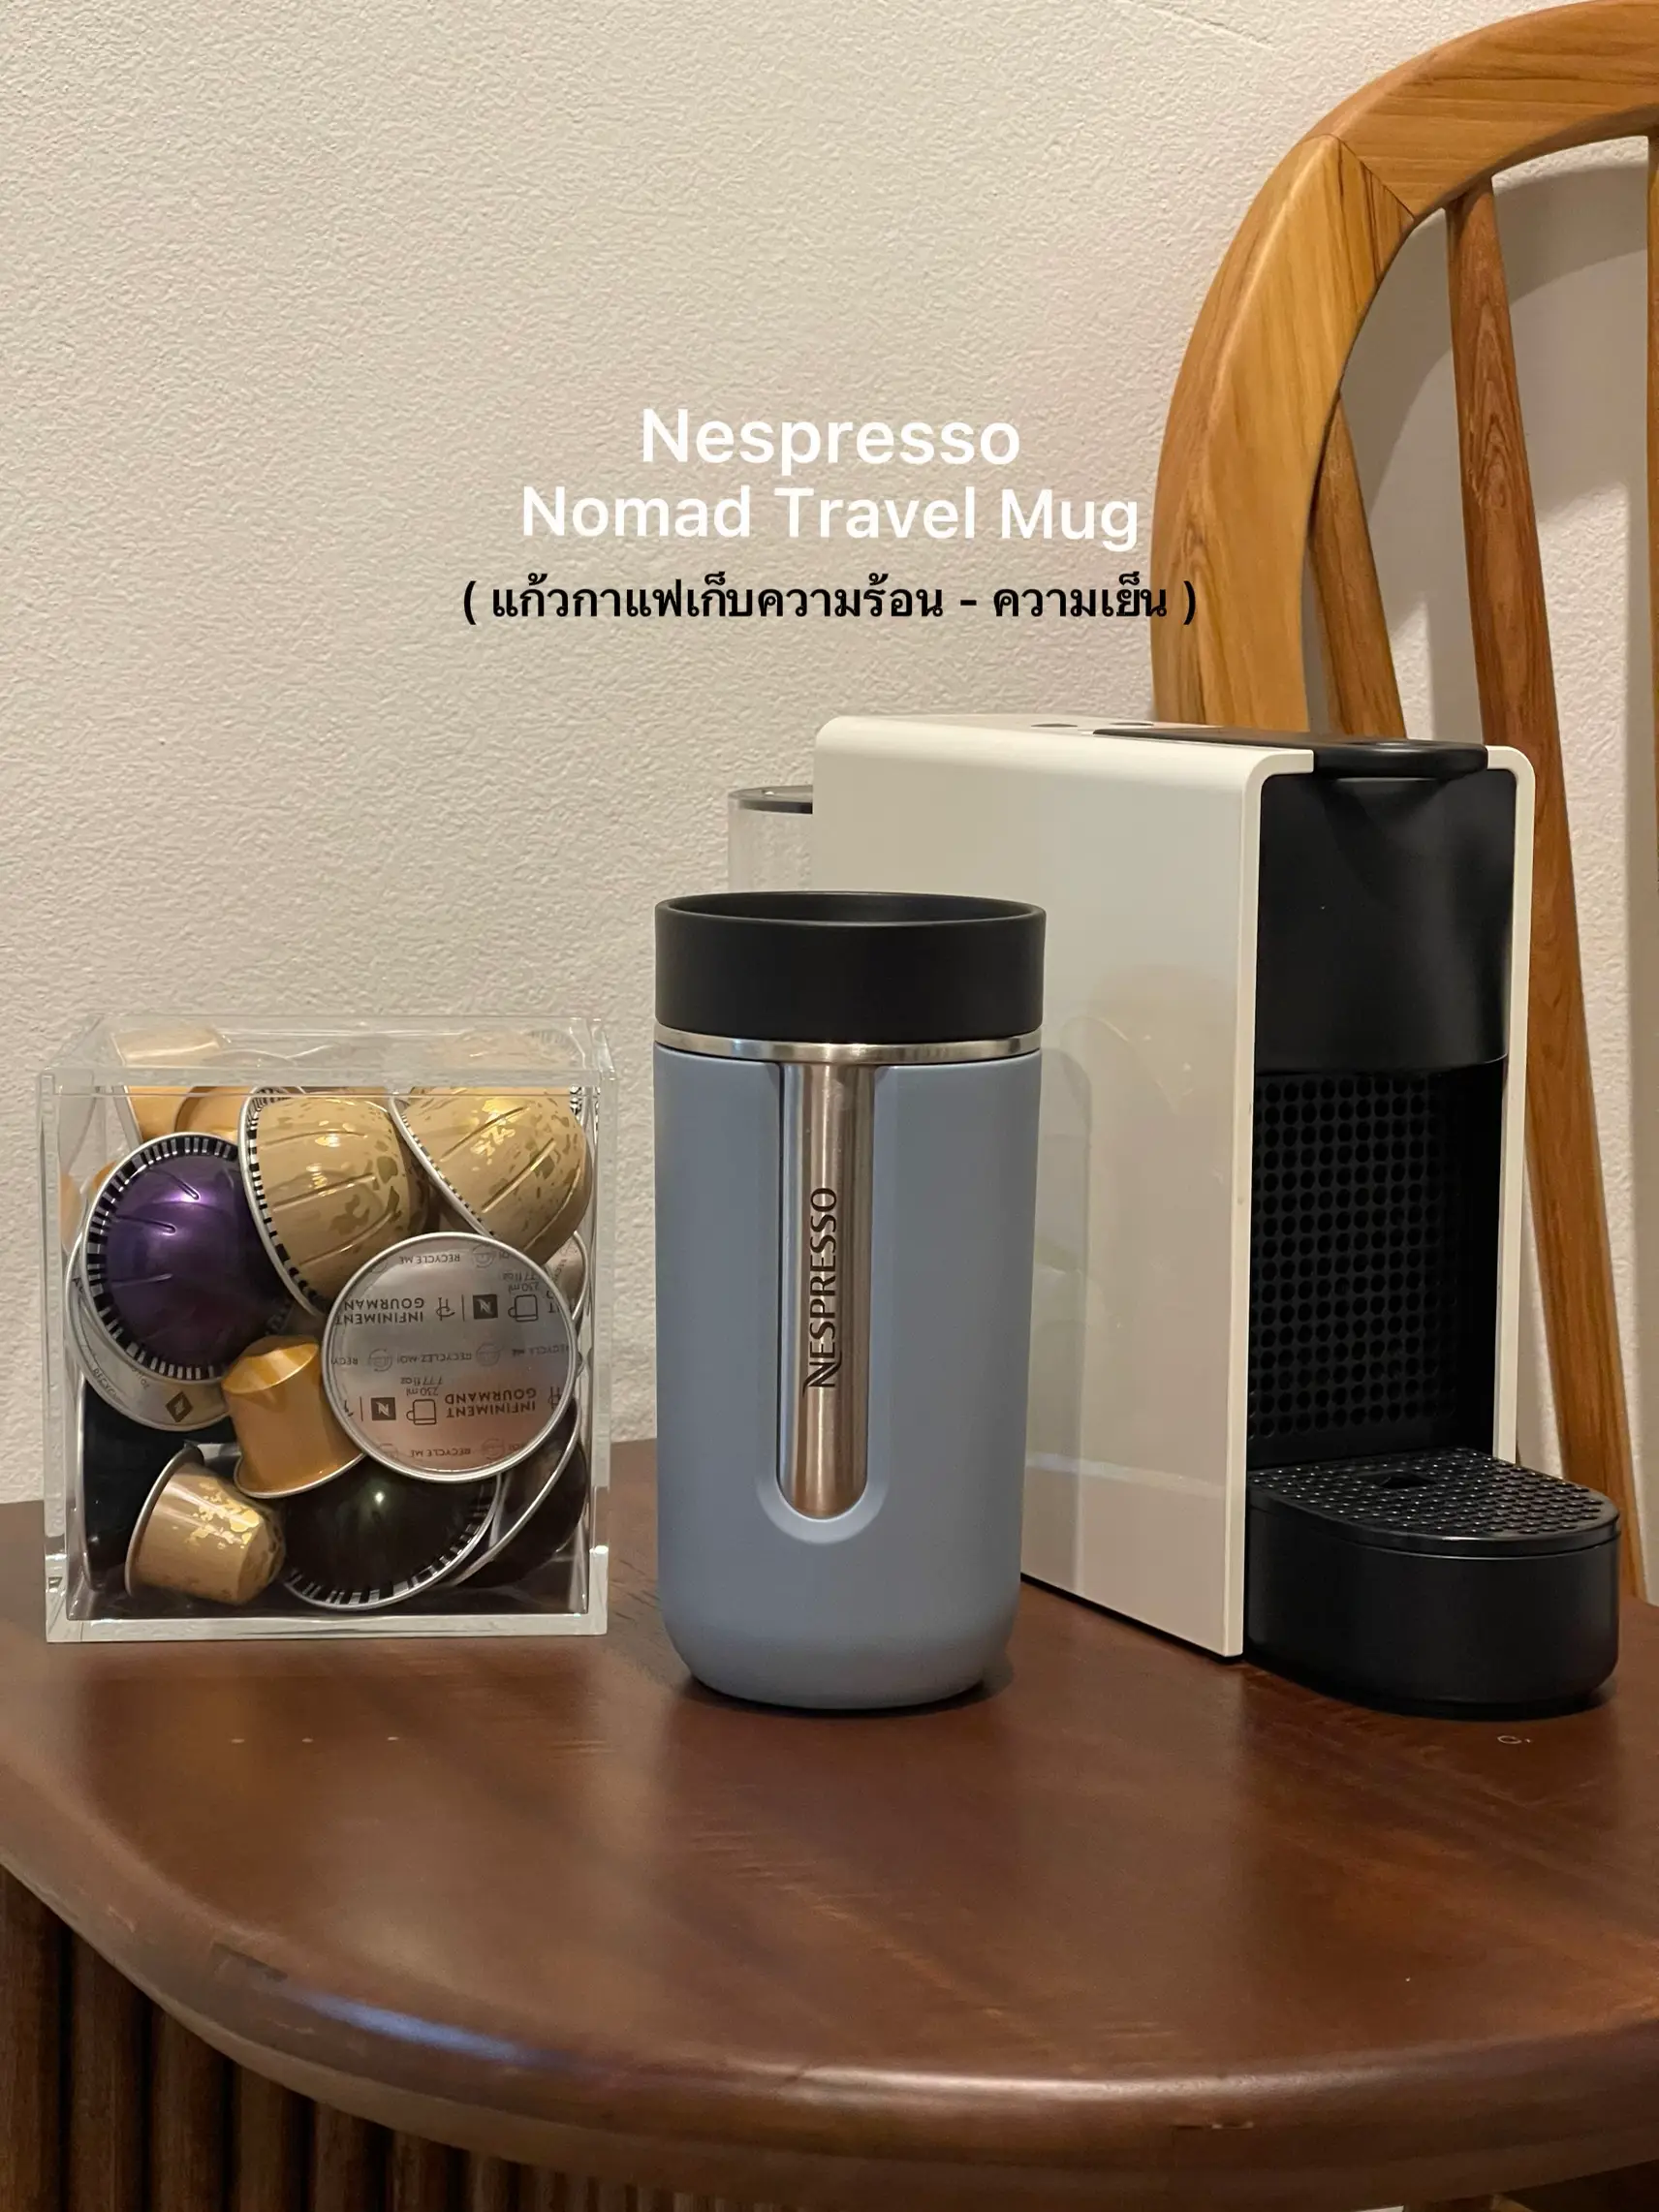 Give me coffee travel mugs that actually work pls #nespresso #produc